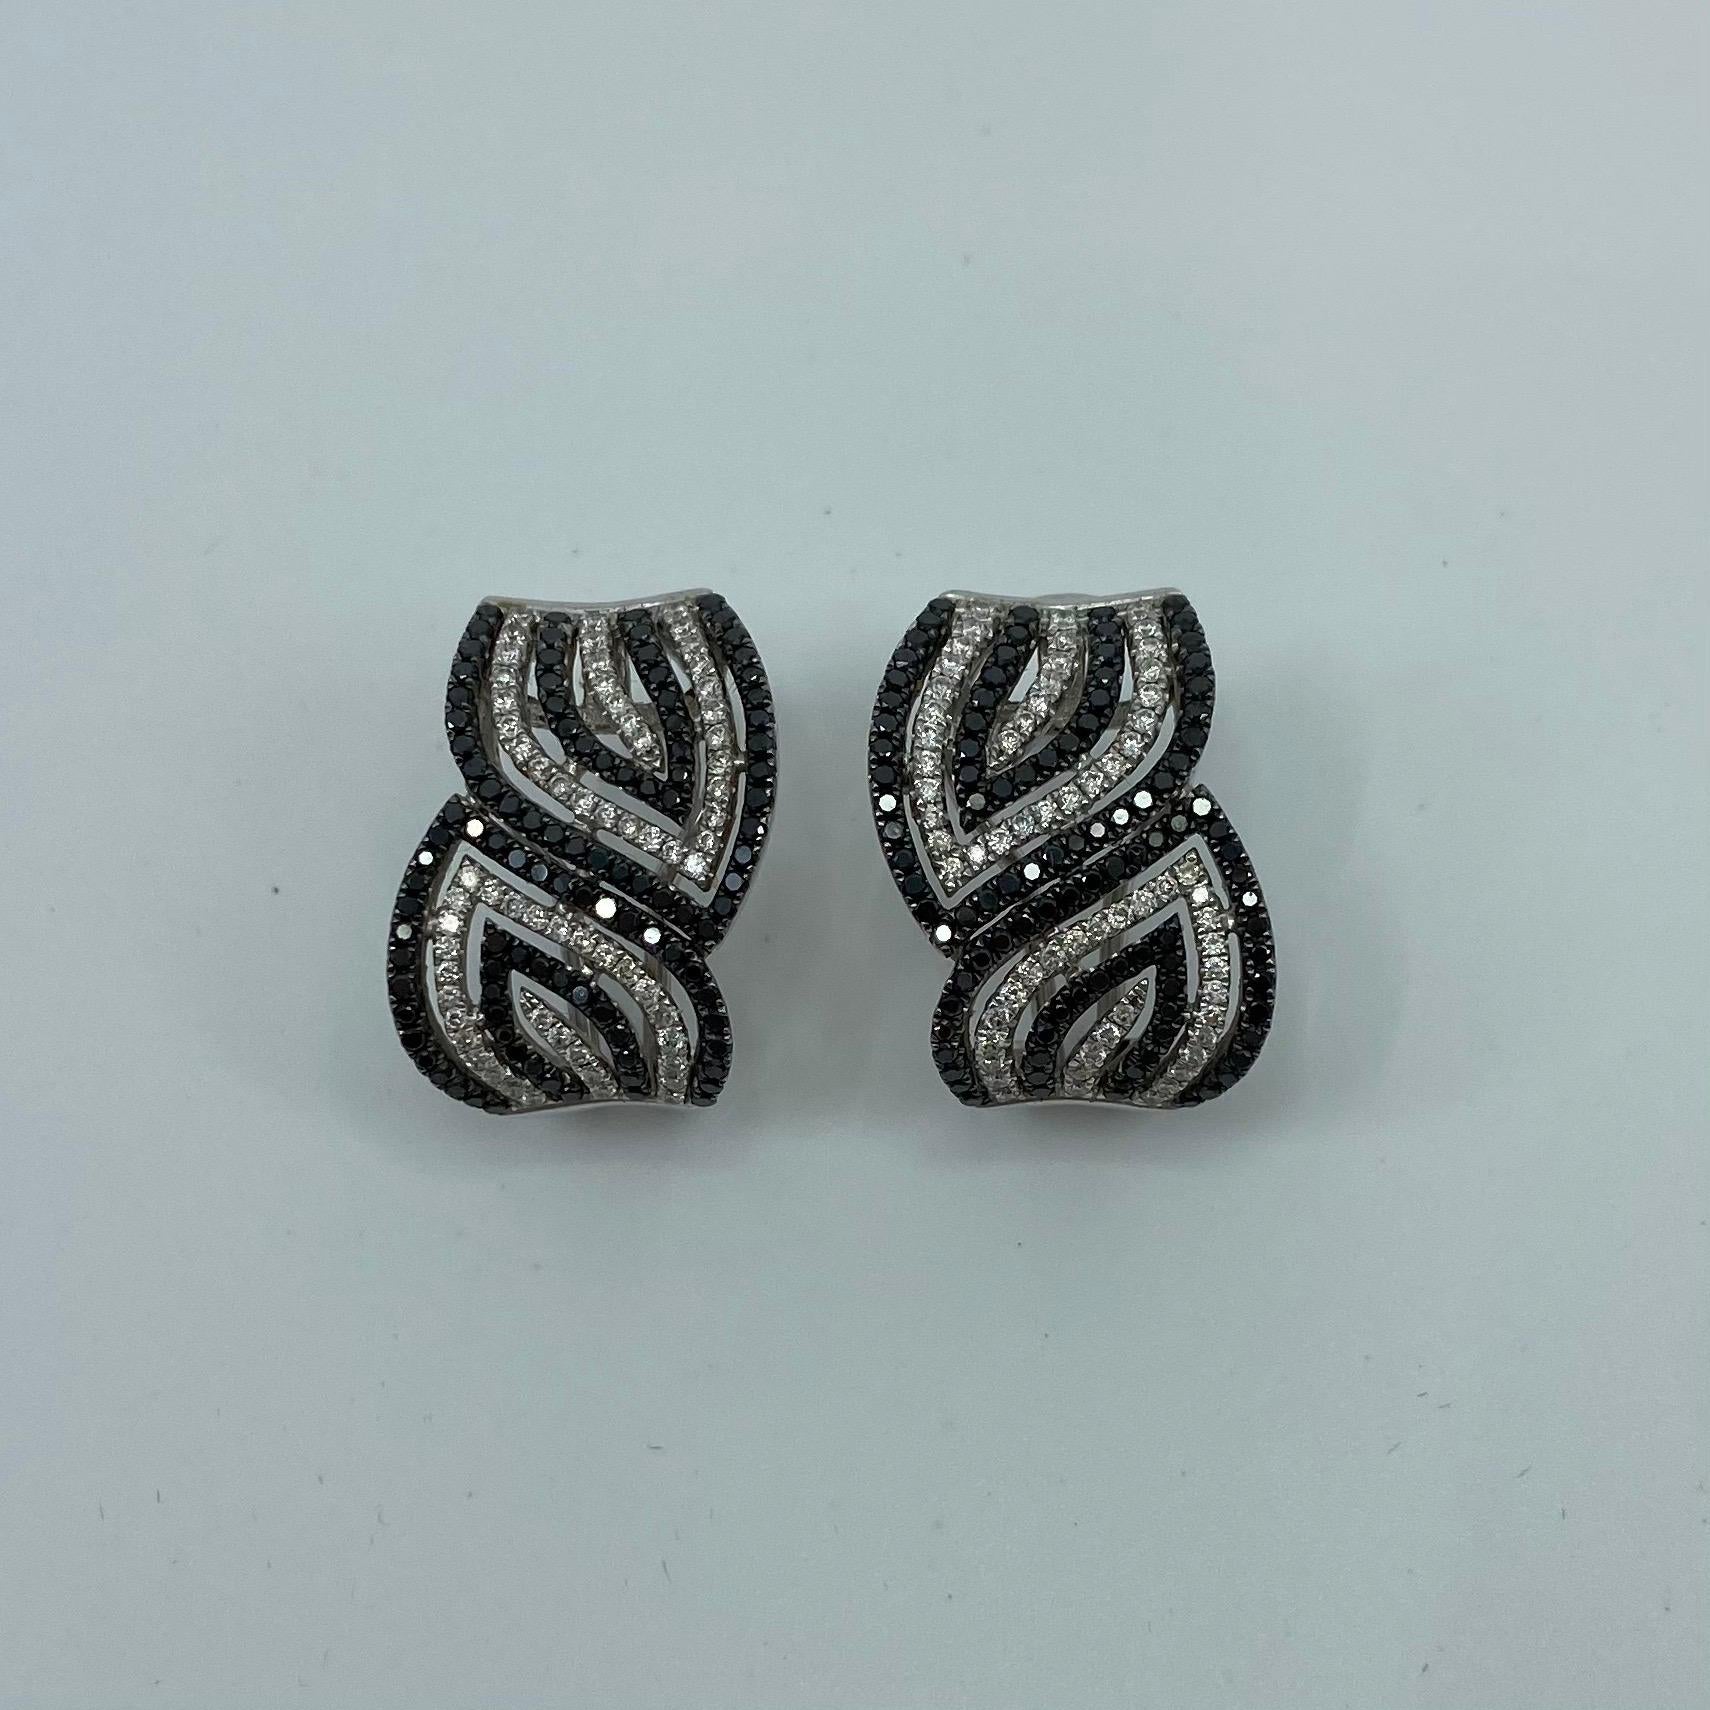 Modern Black & White Diamond 18 Karat White Gold Swirl Earrings.

Beautiful and stylish black and white diamond earrings with a unique modern swirl look. We also have a matching ring for these.

Earrings have a strong clip with earring posts.
Fully